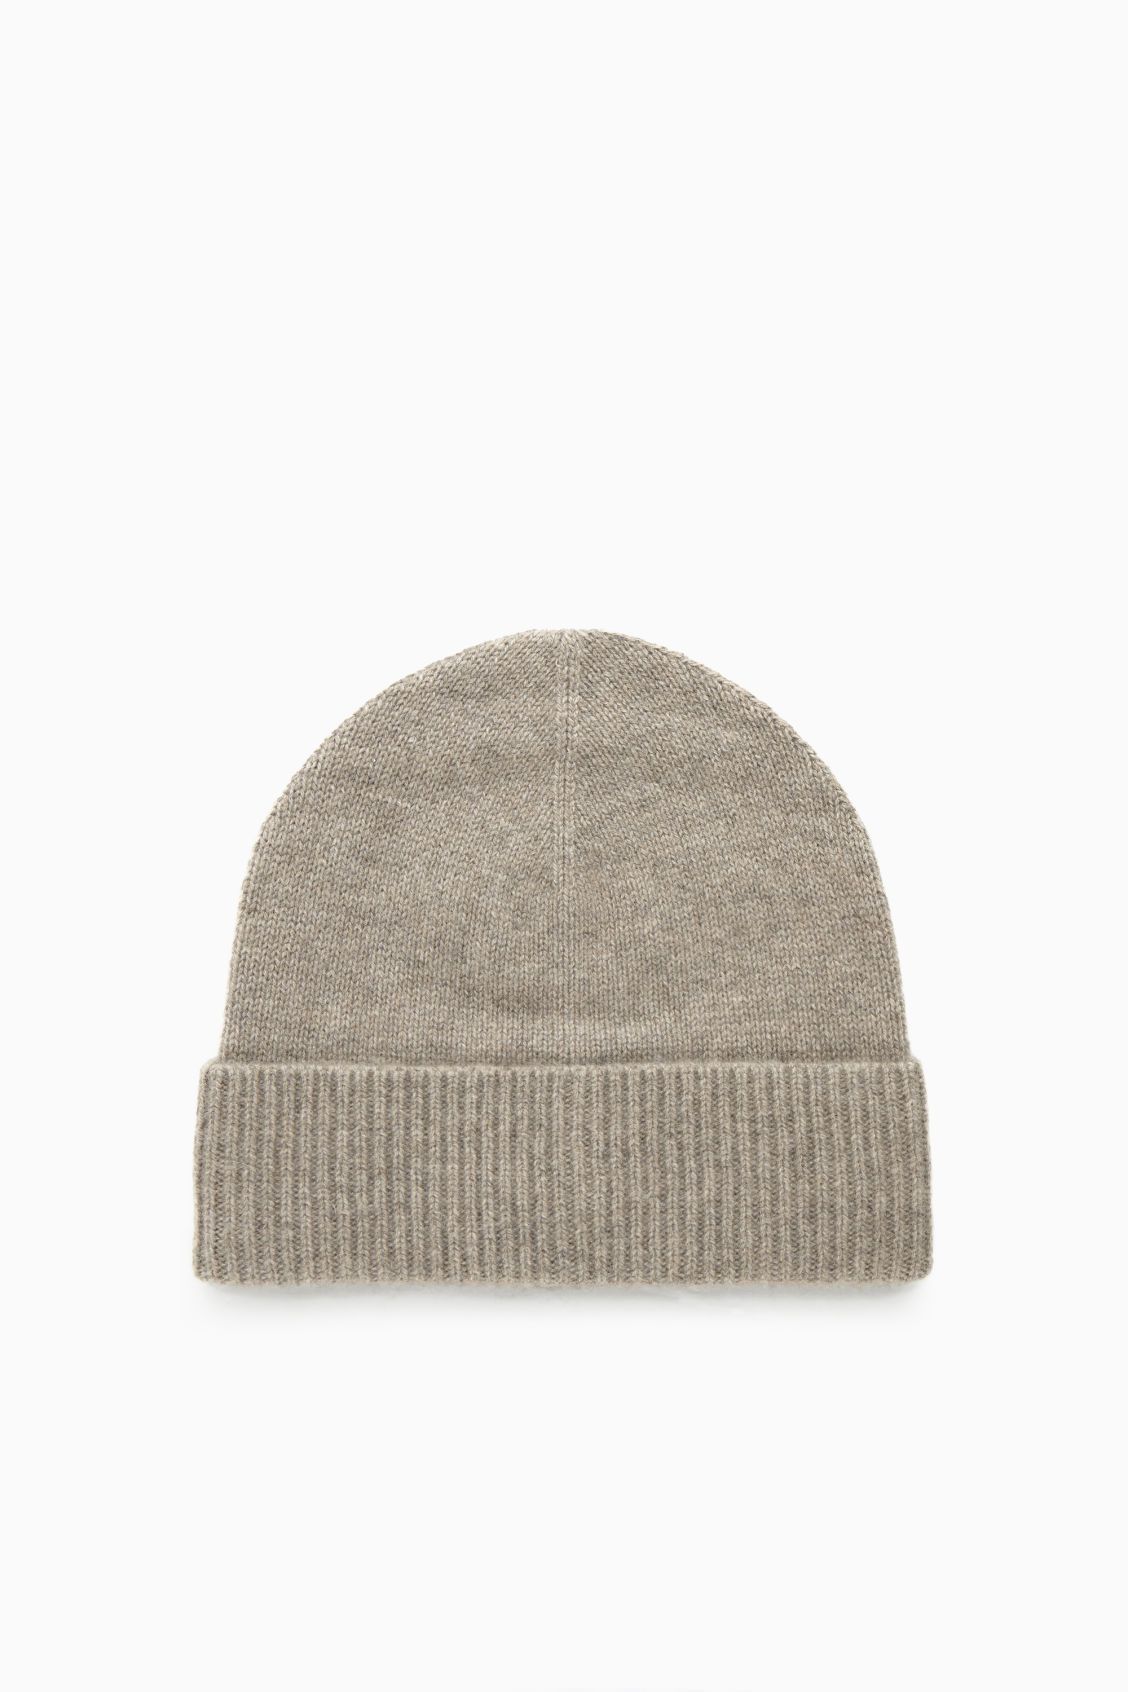 PURE CASHMERE BEANIE | COS UK